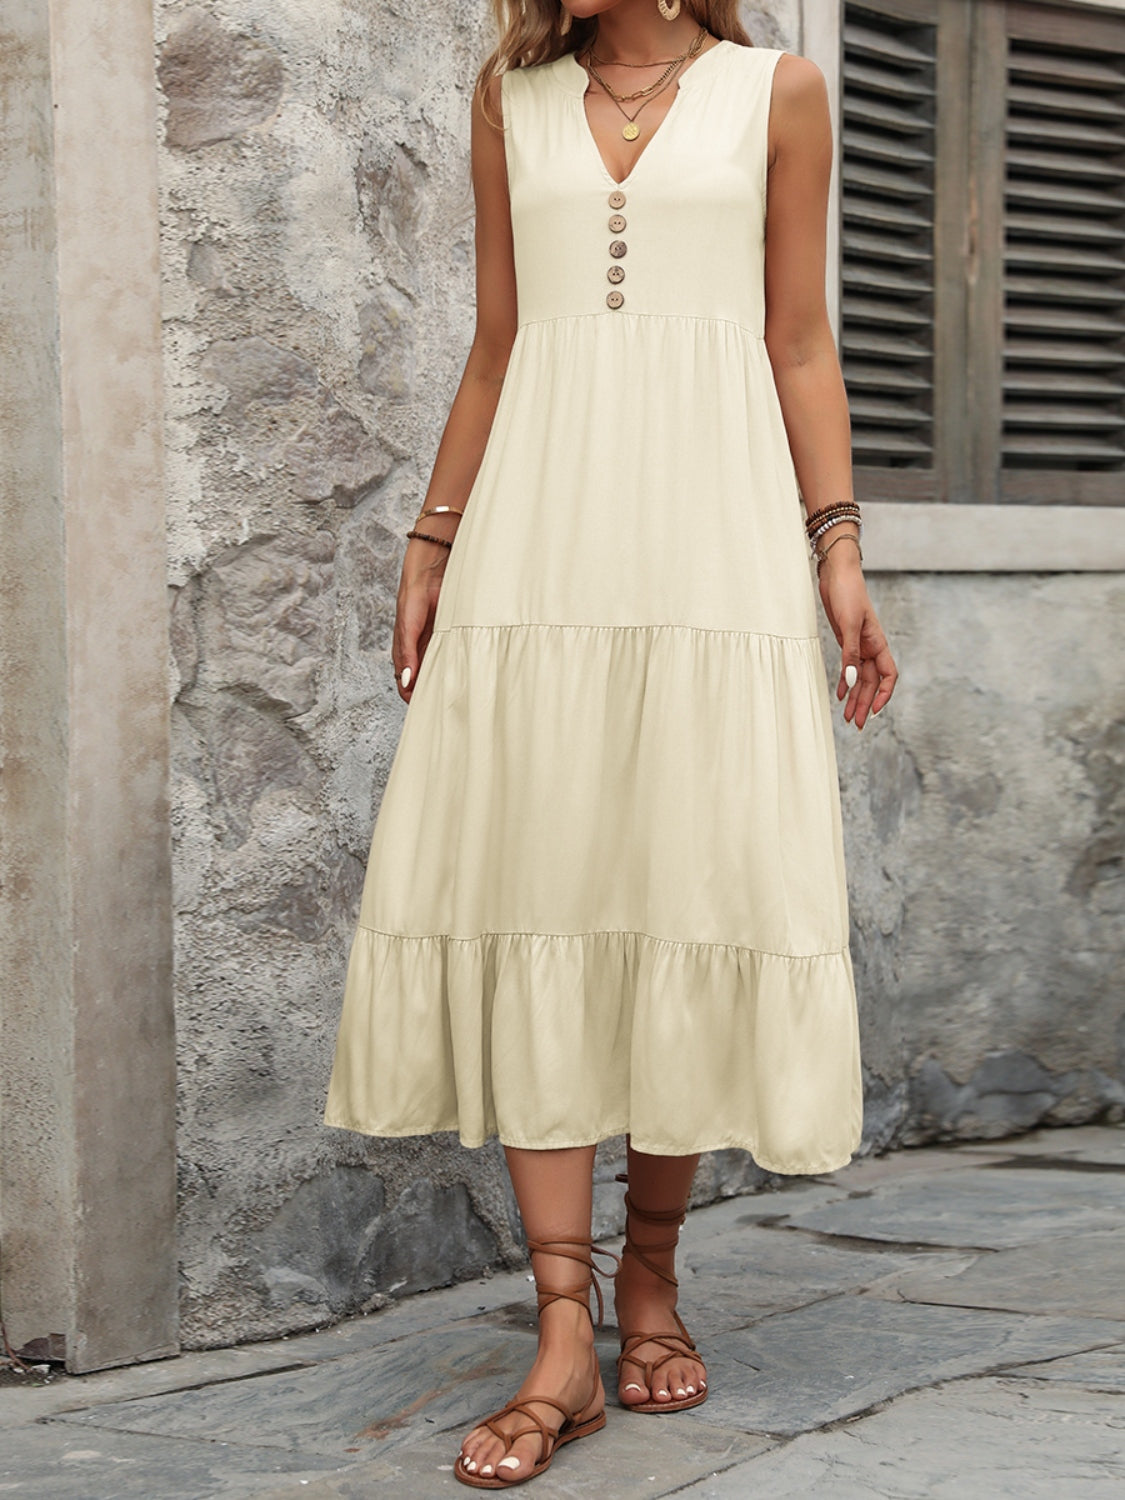 Cotton Sleeveless Dress with Decorative Buttons